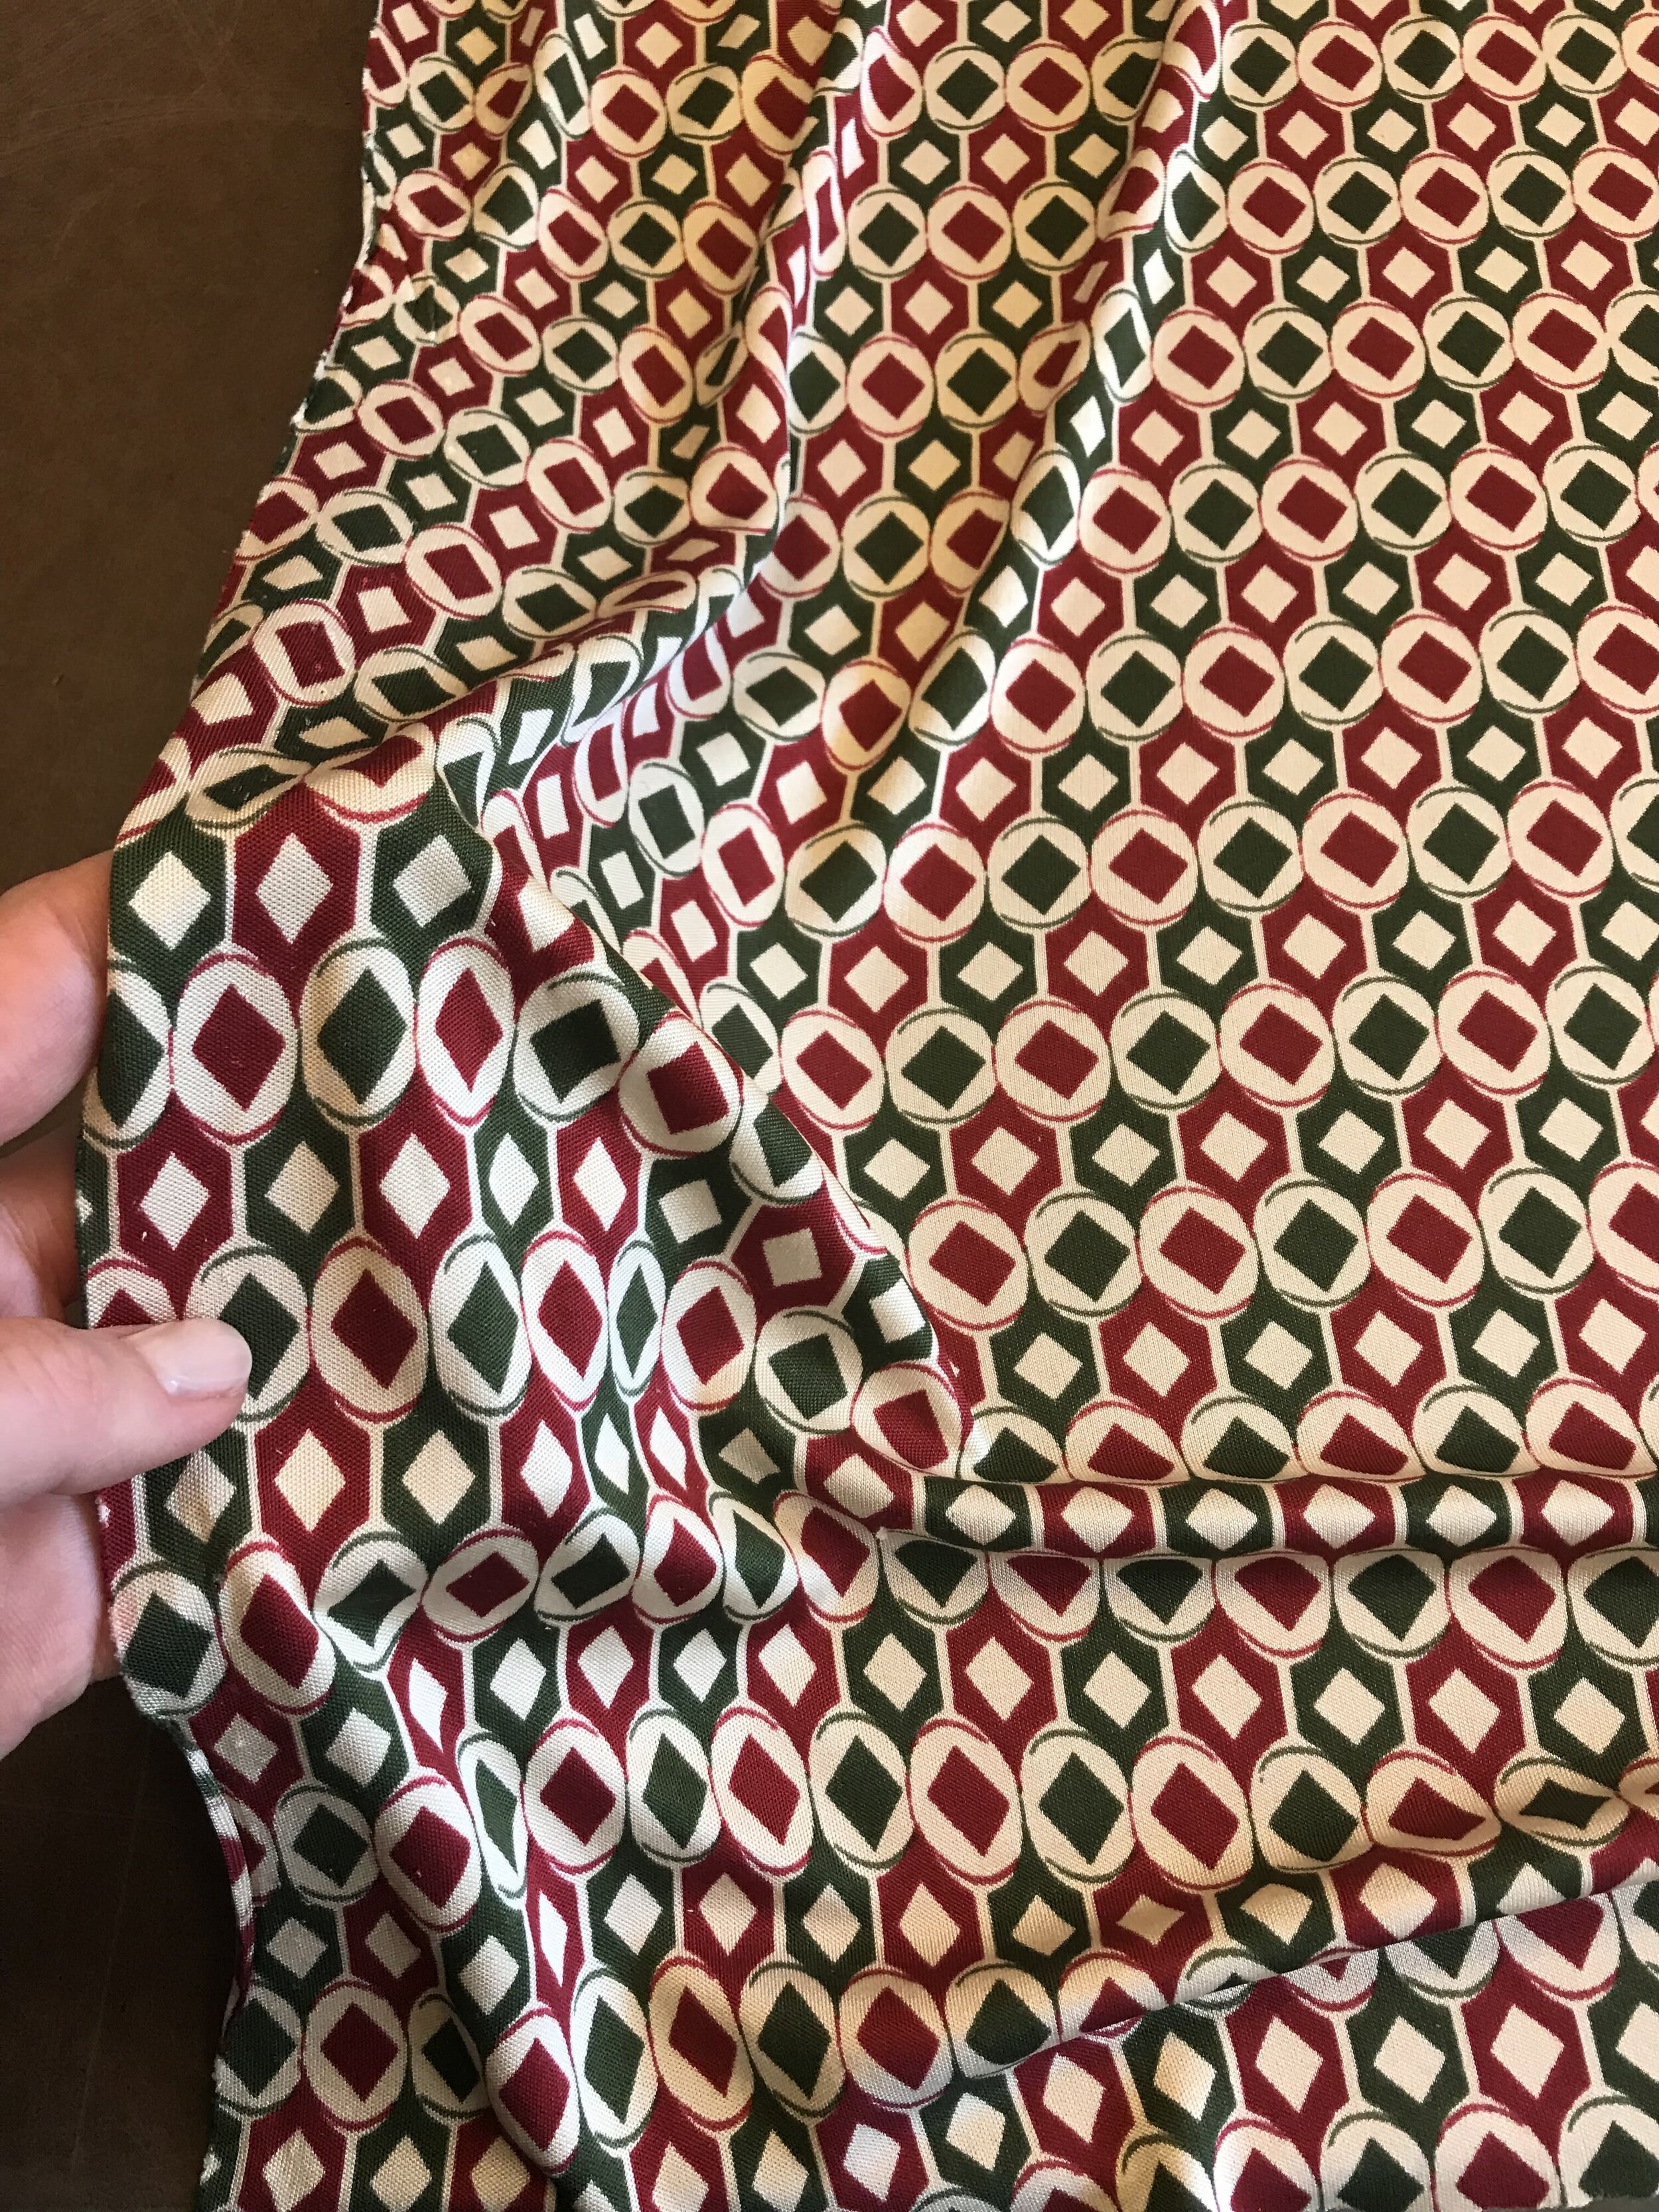 Fabric I sourced and used for "Heinz" shirt, ep 101